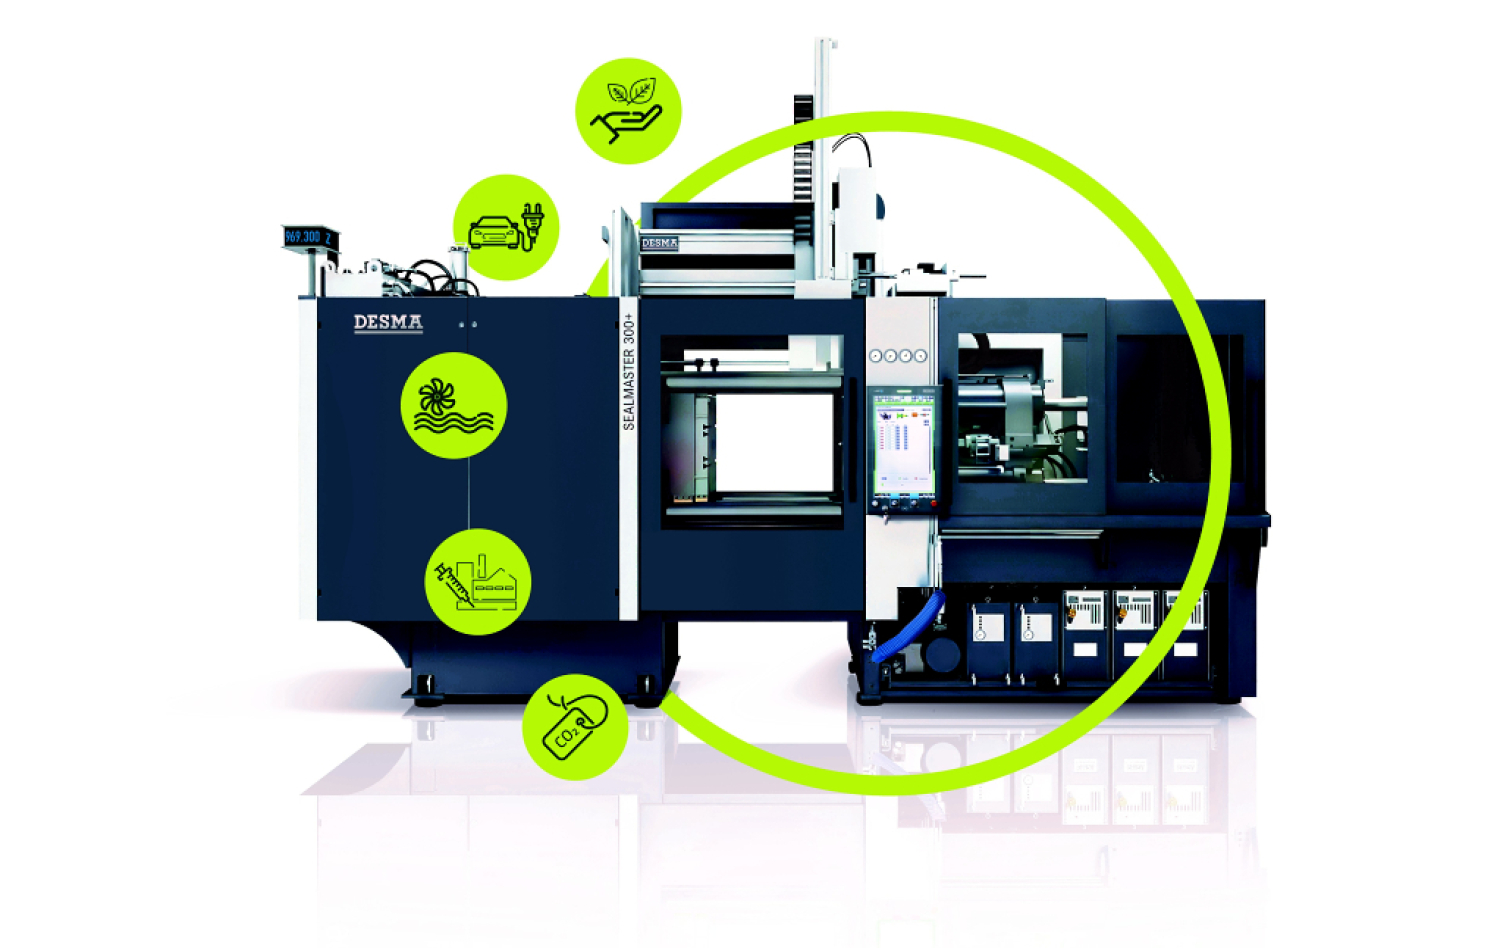 DESMA will present manufacturing solutions for a sustainable future at the DKT in Nuremberg